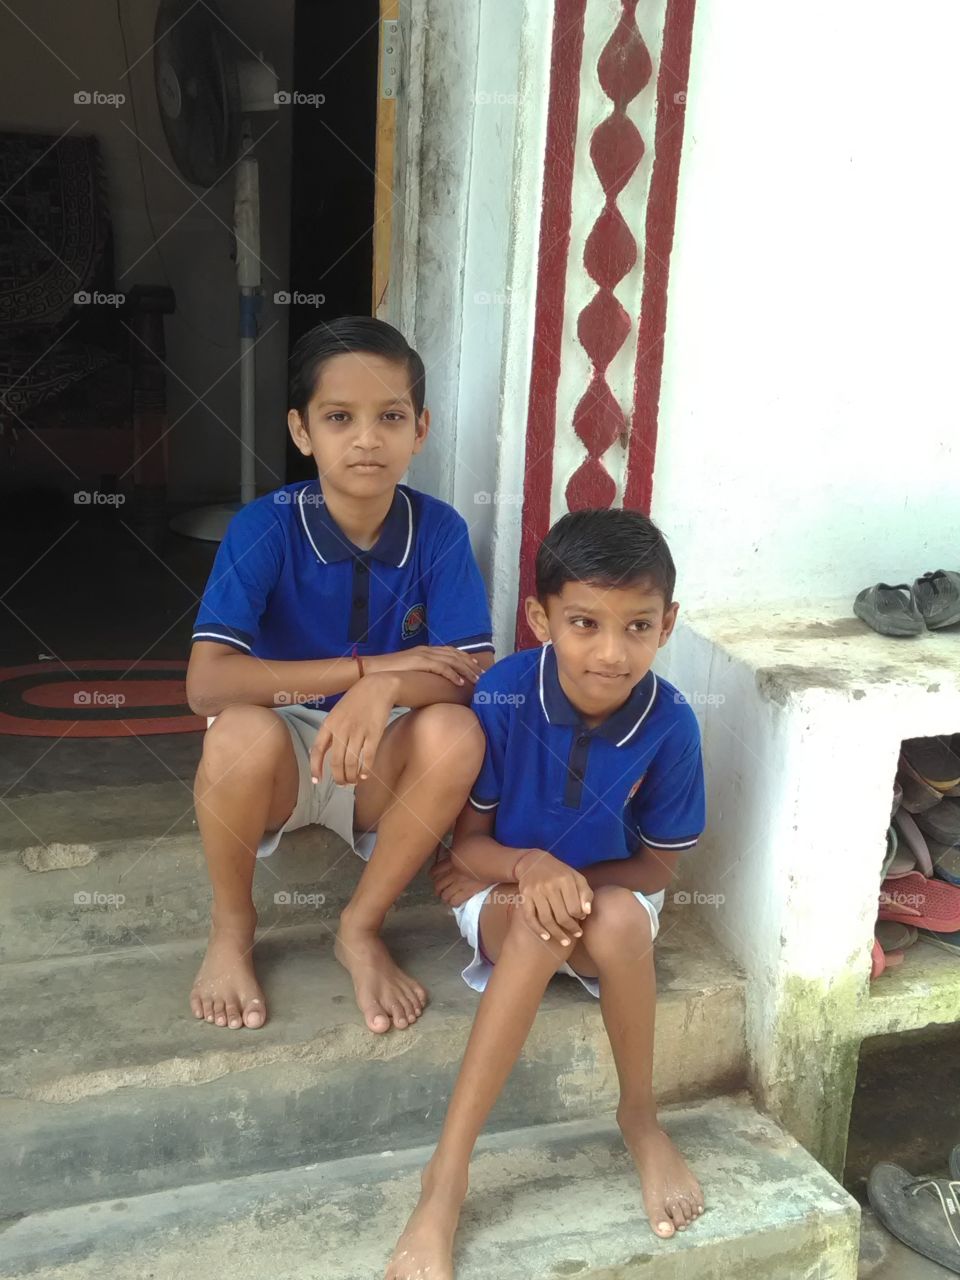 This is my two sons "OM" AND"AKSHHYAT".